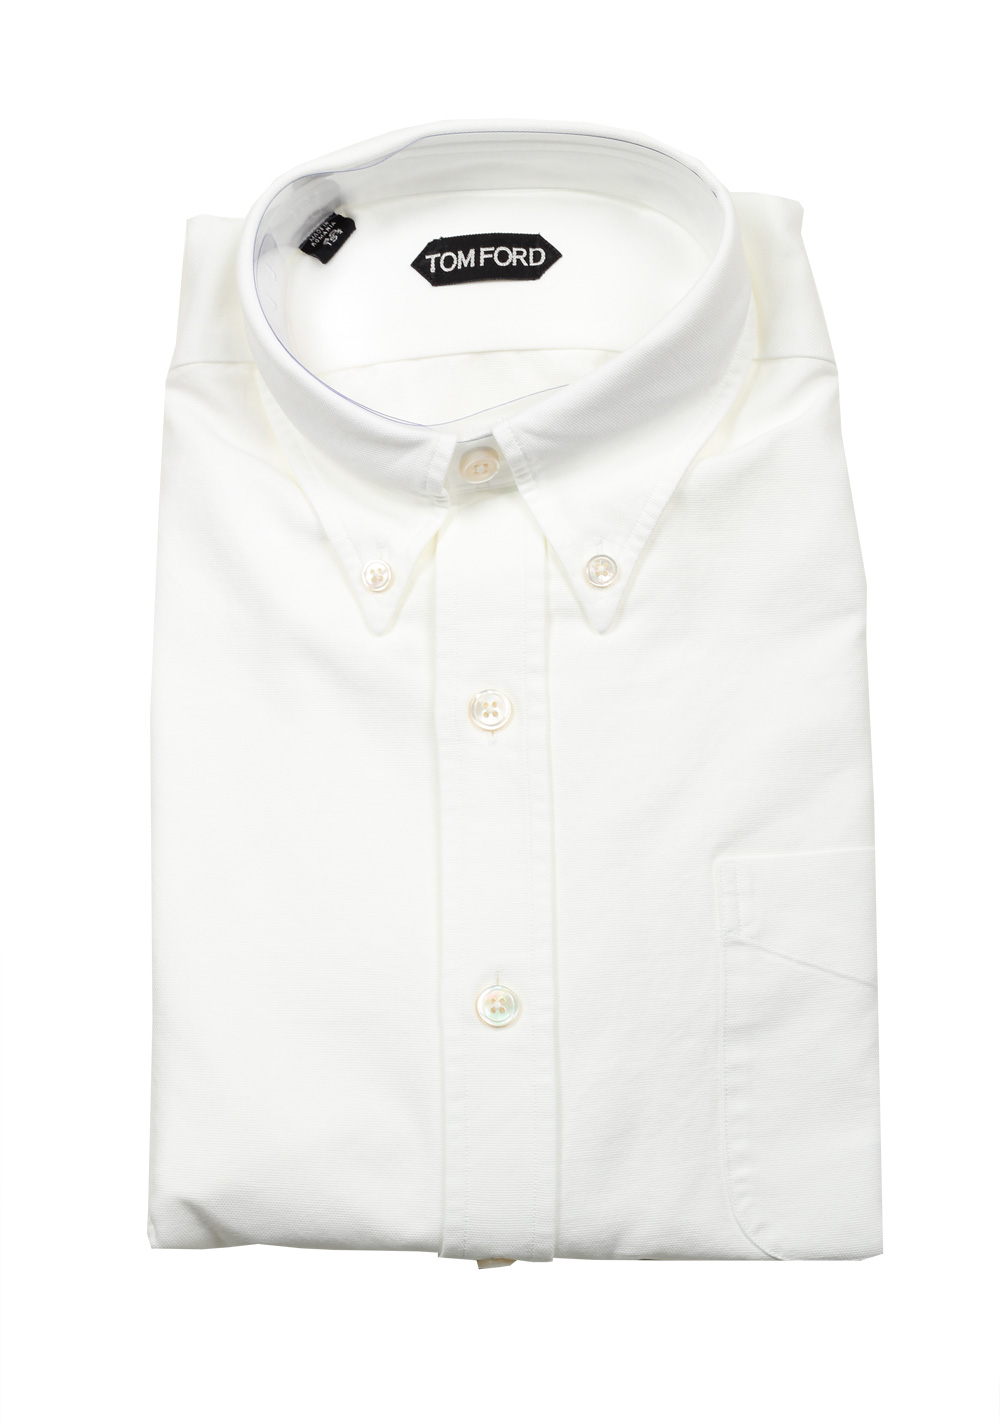 TOM FORD Solid White Casual Button Down Shirt Size 40 / 15,75 . |  Costume Limité